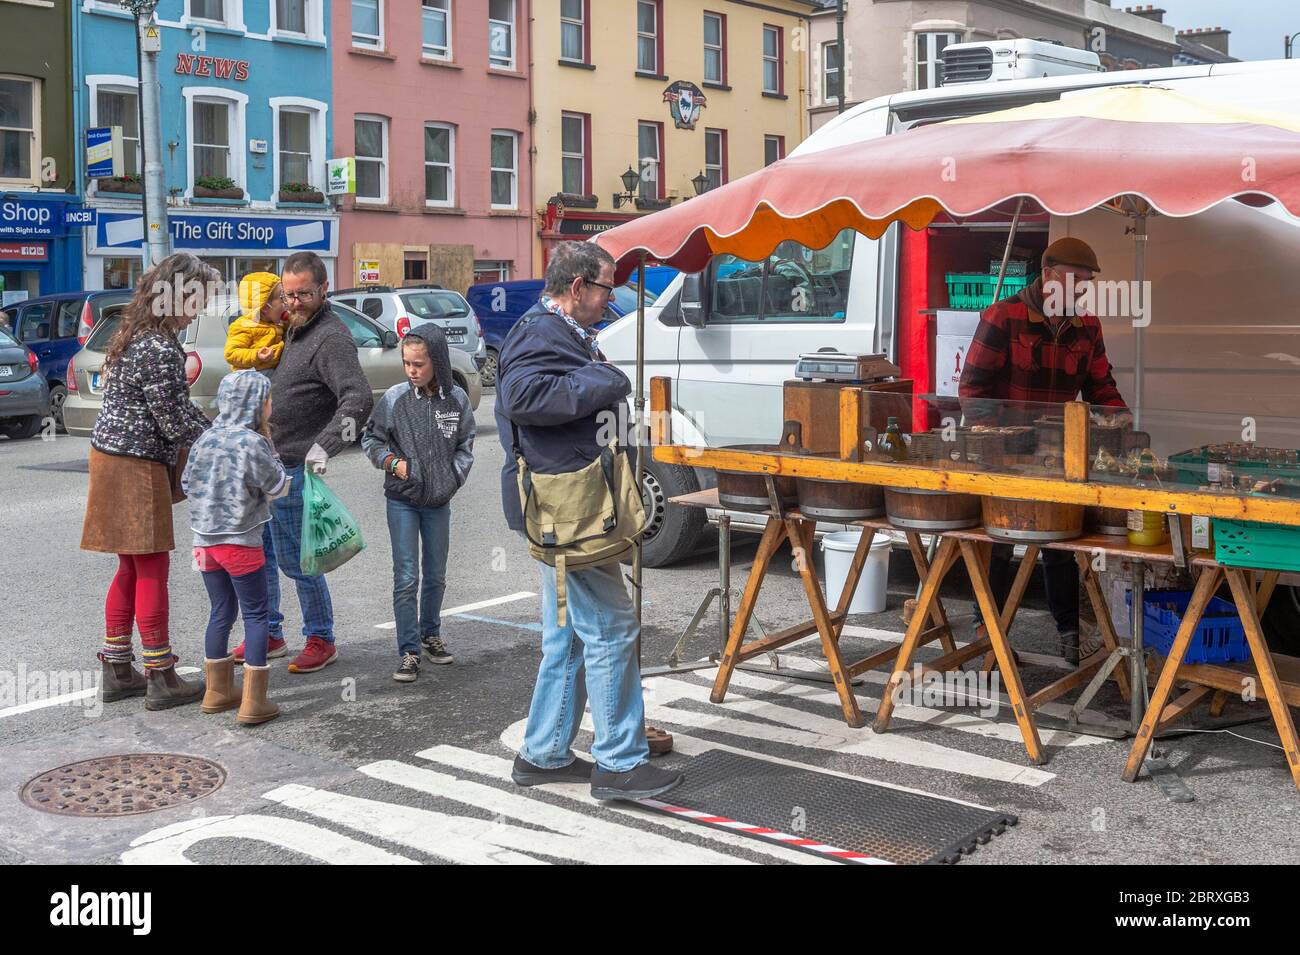 Bantry, West Cork, Ireland. 22nd May, 2020. Despite gale force winds, Bantry Market re-opened today with big crowds after a 2 month closure due to the Covid-19 pandemic. Credit: AG News/Alamy Live News Stock Photo